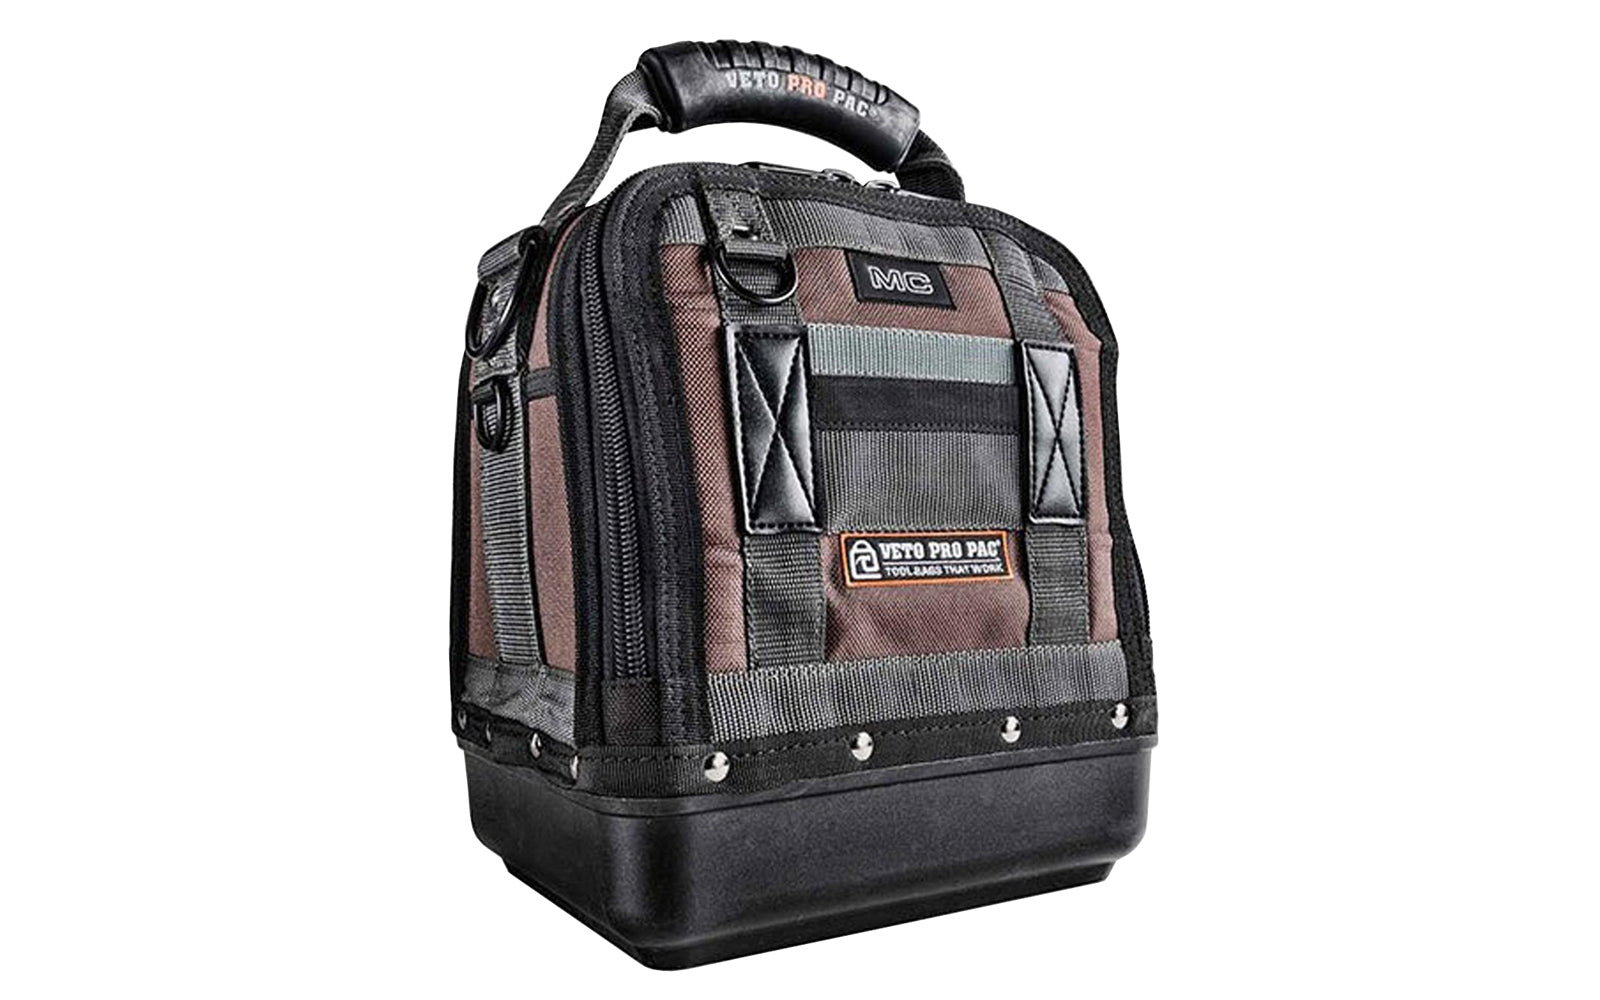 Veto Bags - Veto Pro Pac MC - 20 interior & exterior pockets - Compact storage bag with zipper - Waterproof thick polypropylene base - shoulder strap - 851578000424 - Model MC - tool storage - 10" Long x  8" Wide x  12" High - 3 large pockets for meters & large tools - Model MC - troubleshooting, diagnostics bag - Veto